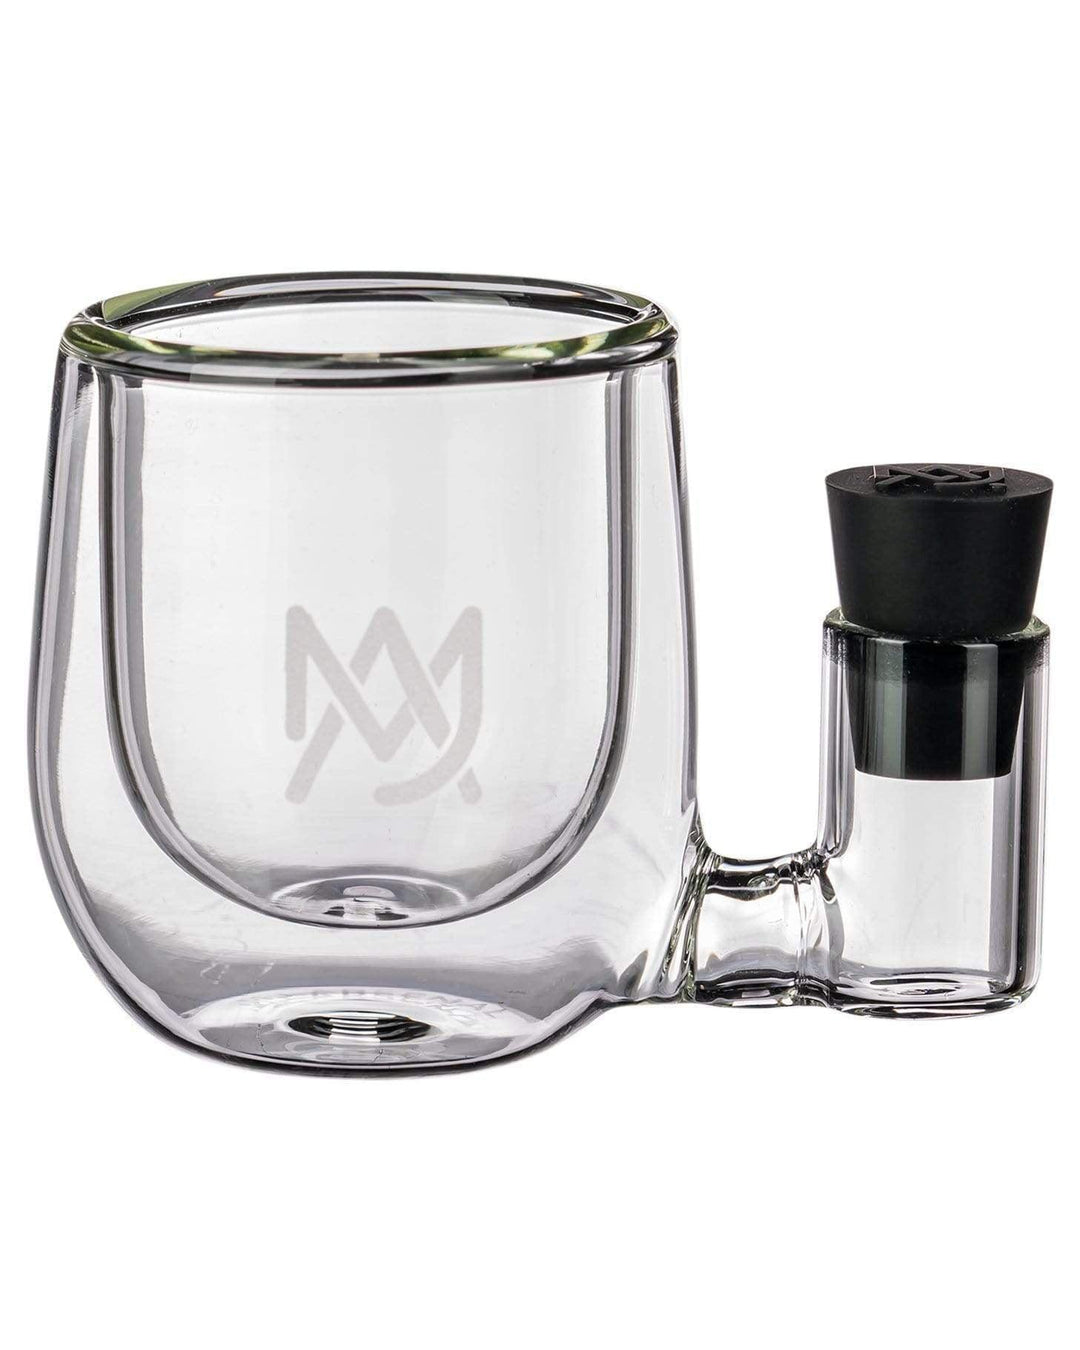 MJ Arsenal Terp Pearls Clear – Crystallized Nectar